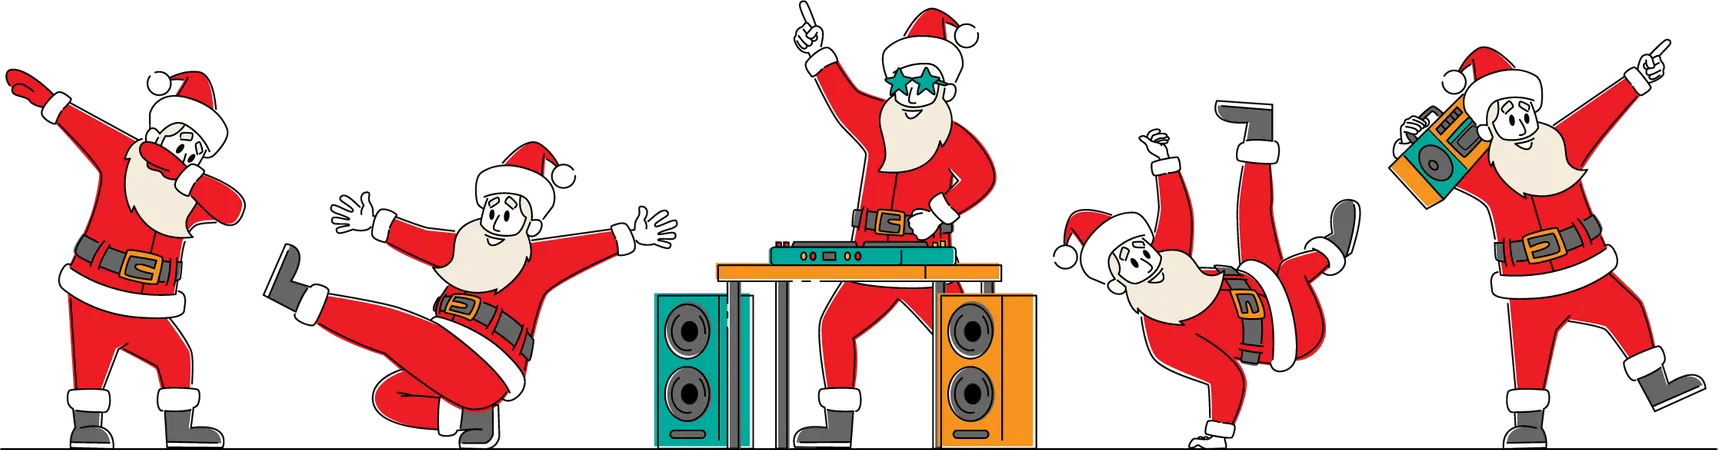 Funny Santa Claus Dancing Funny Christmas Characters Making Dab Move Dance Break And Hip Hop Style Dance Young Teenage Culture Holiday Greeting DJ Club Party Linear People Vector Illustration イラスト